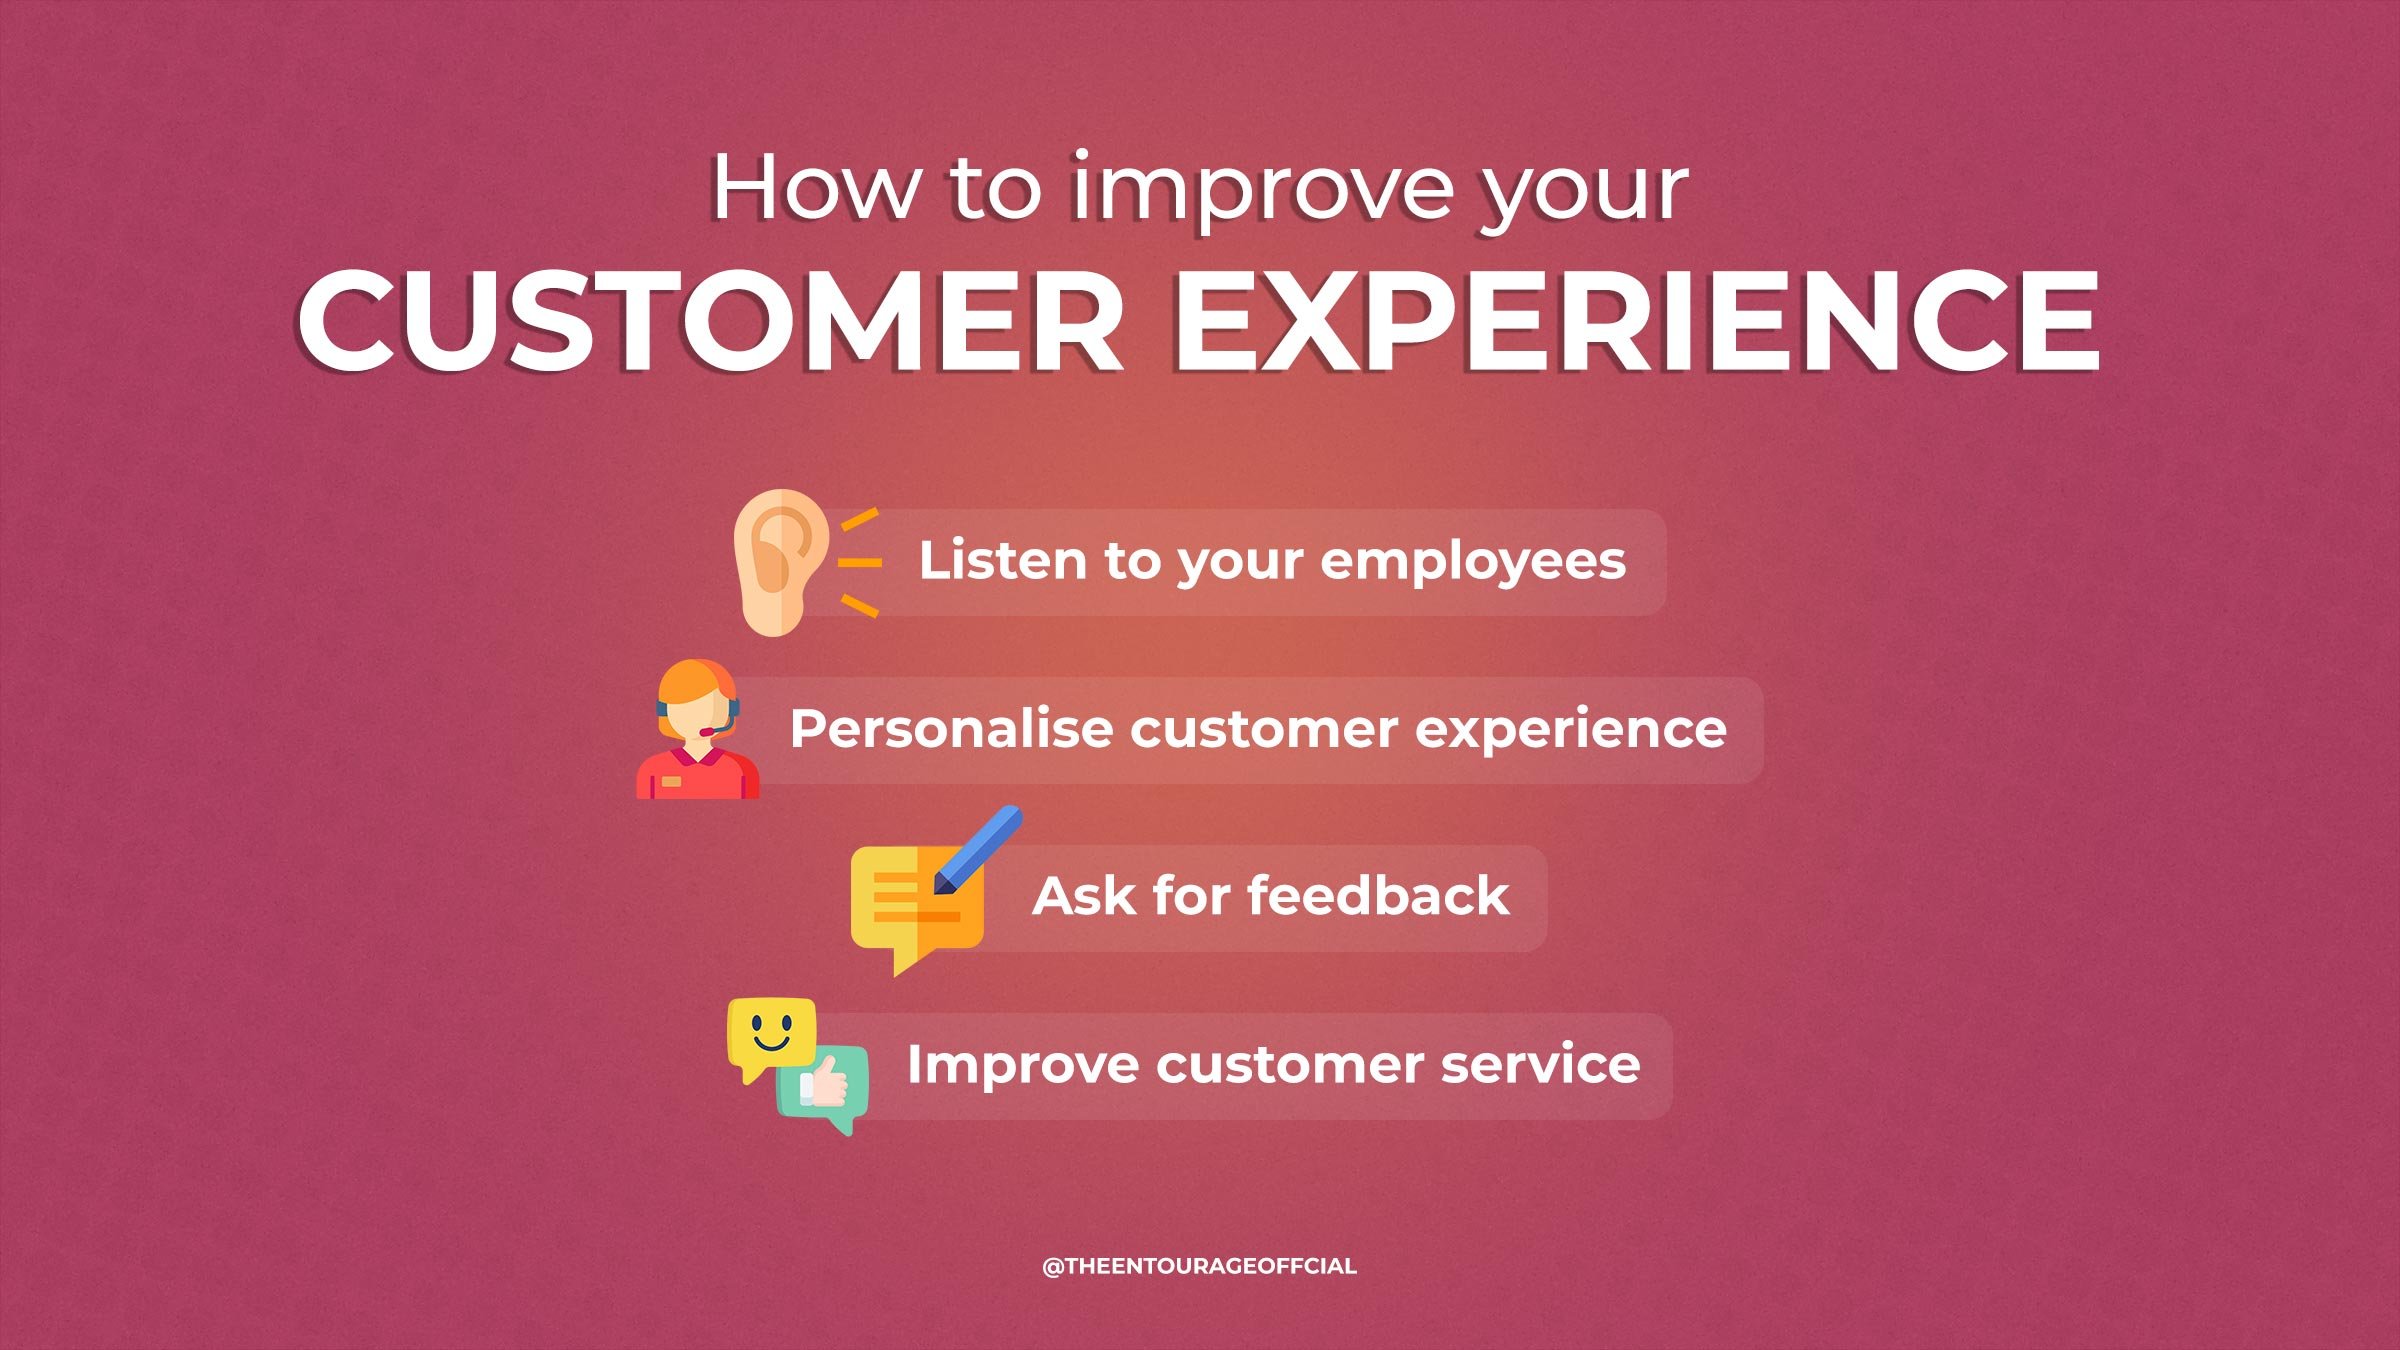 How to improve your customer experience. Listen to your employees. Personalise customer experience. Ask for feedback. Improve customer service.